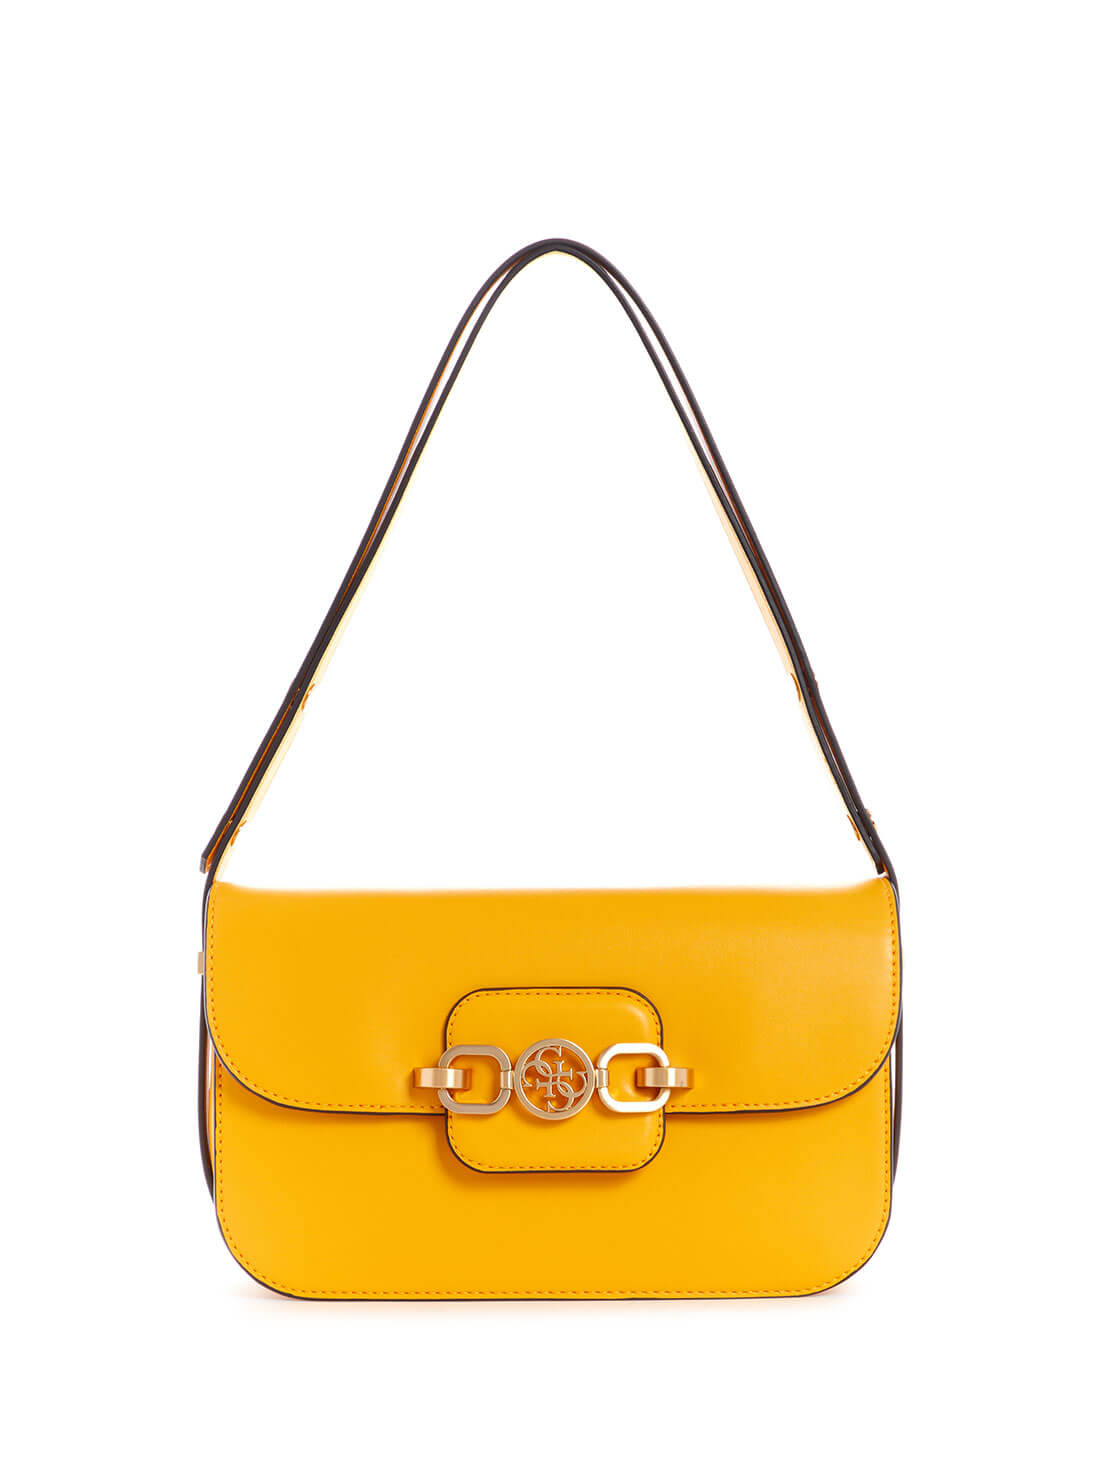 GUESS Womens Yellow Hensely Convertible Shoulder Bag VS811321 Front View